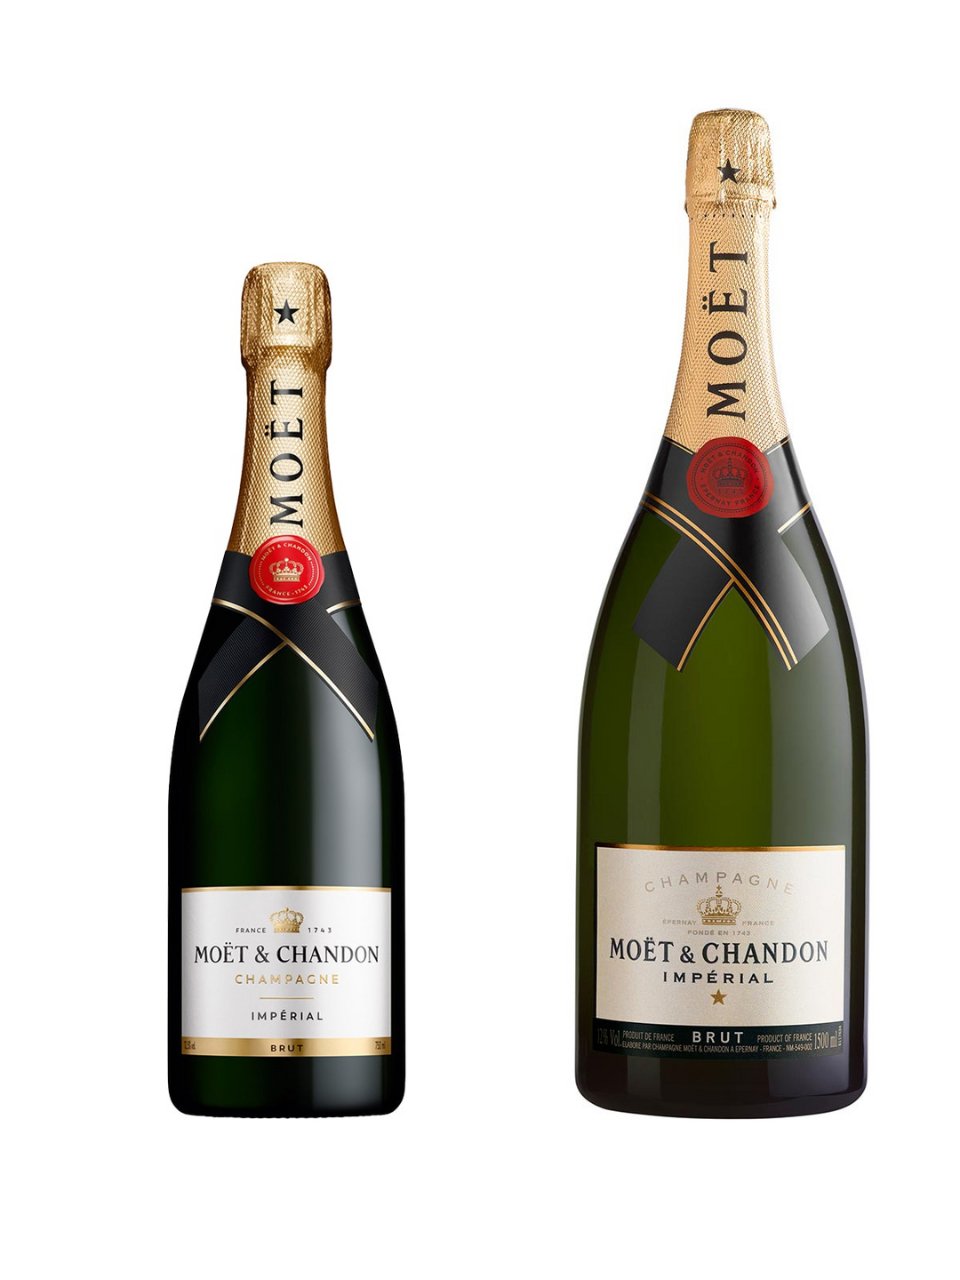 Moët & Chandon Celebration Ensemble: 60 Bottles & 3 Magnums for 100 Guests | Exquisite Wine & Alcohol Gift Delivery Toronto Canada | Vyno